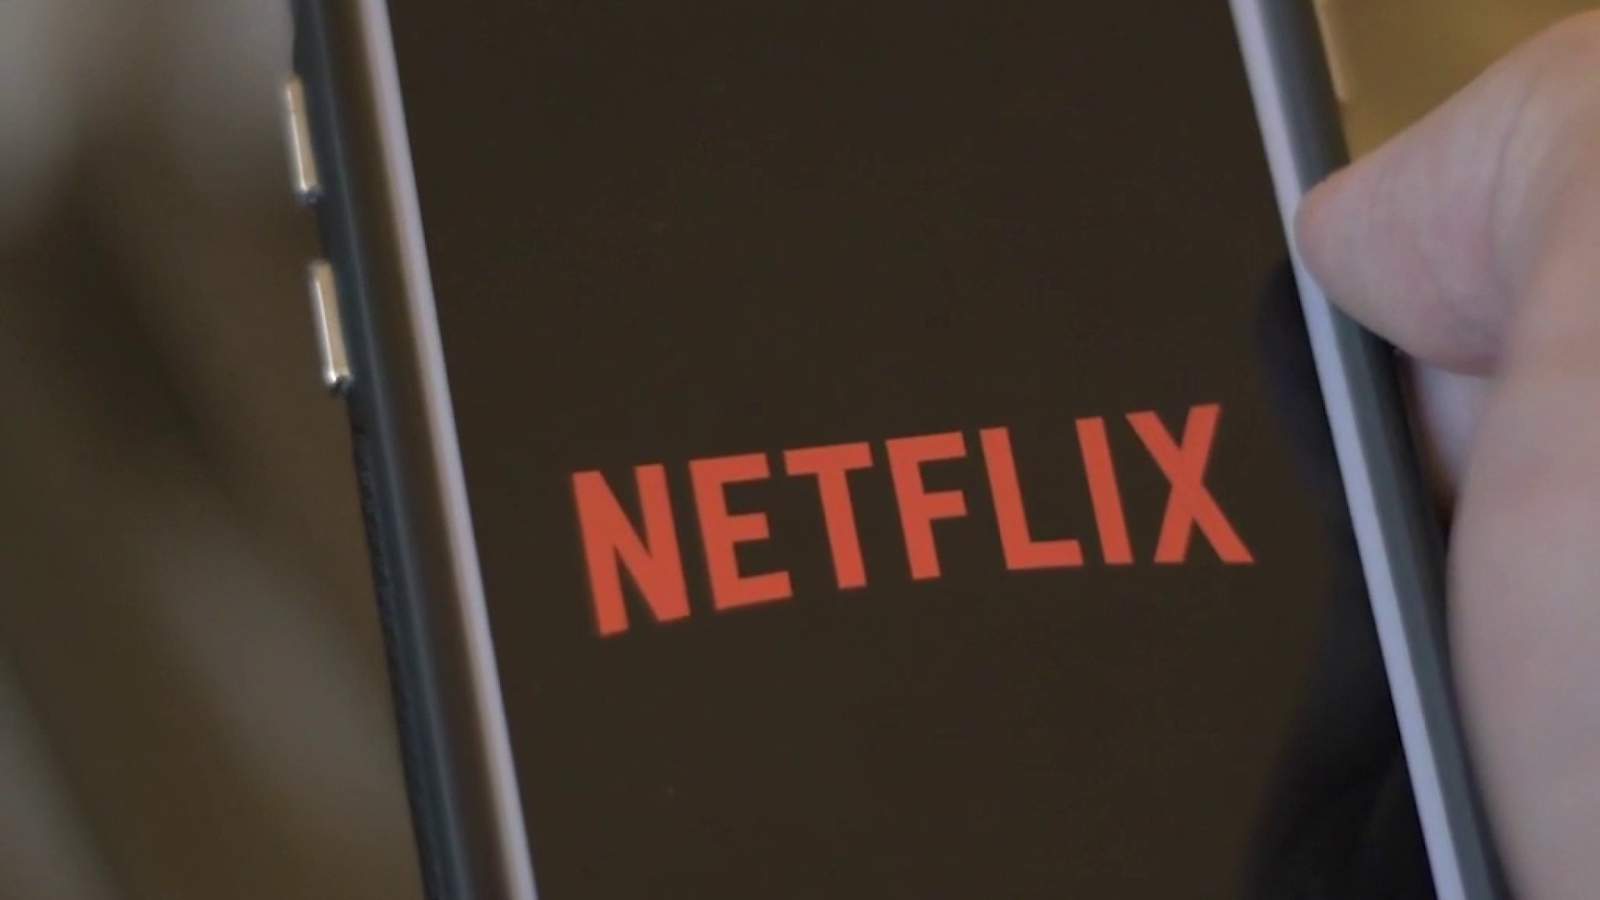 No, Netflix is not offering free subscriptions